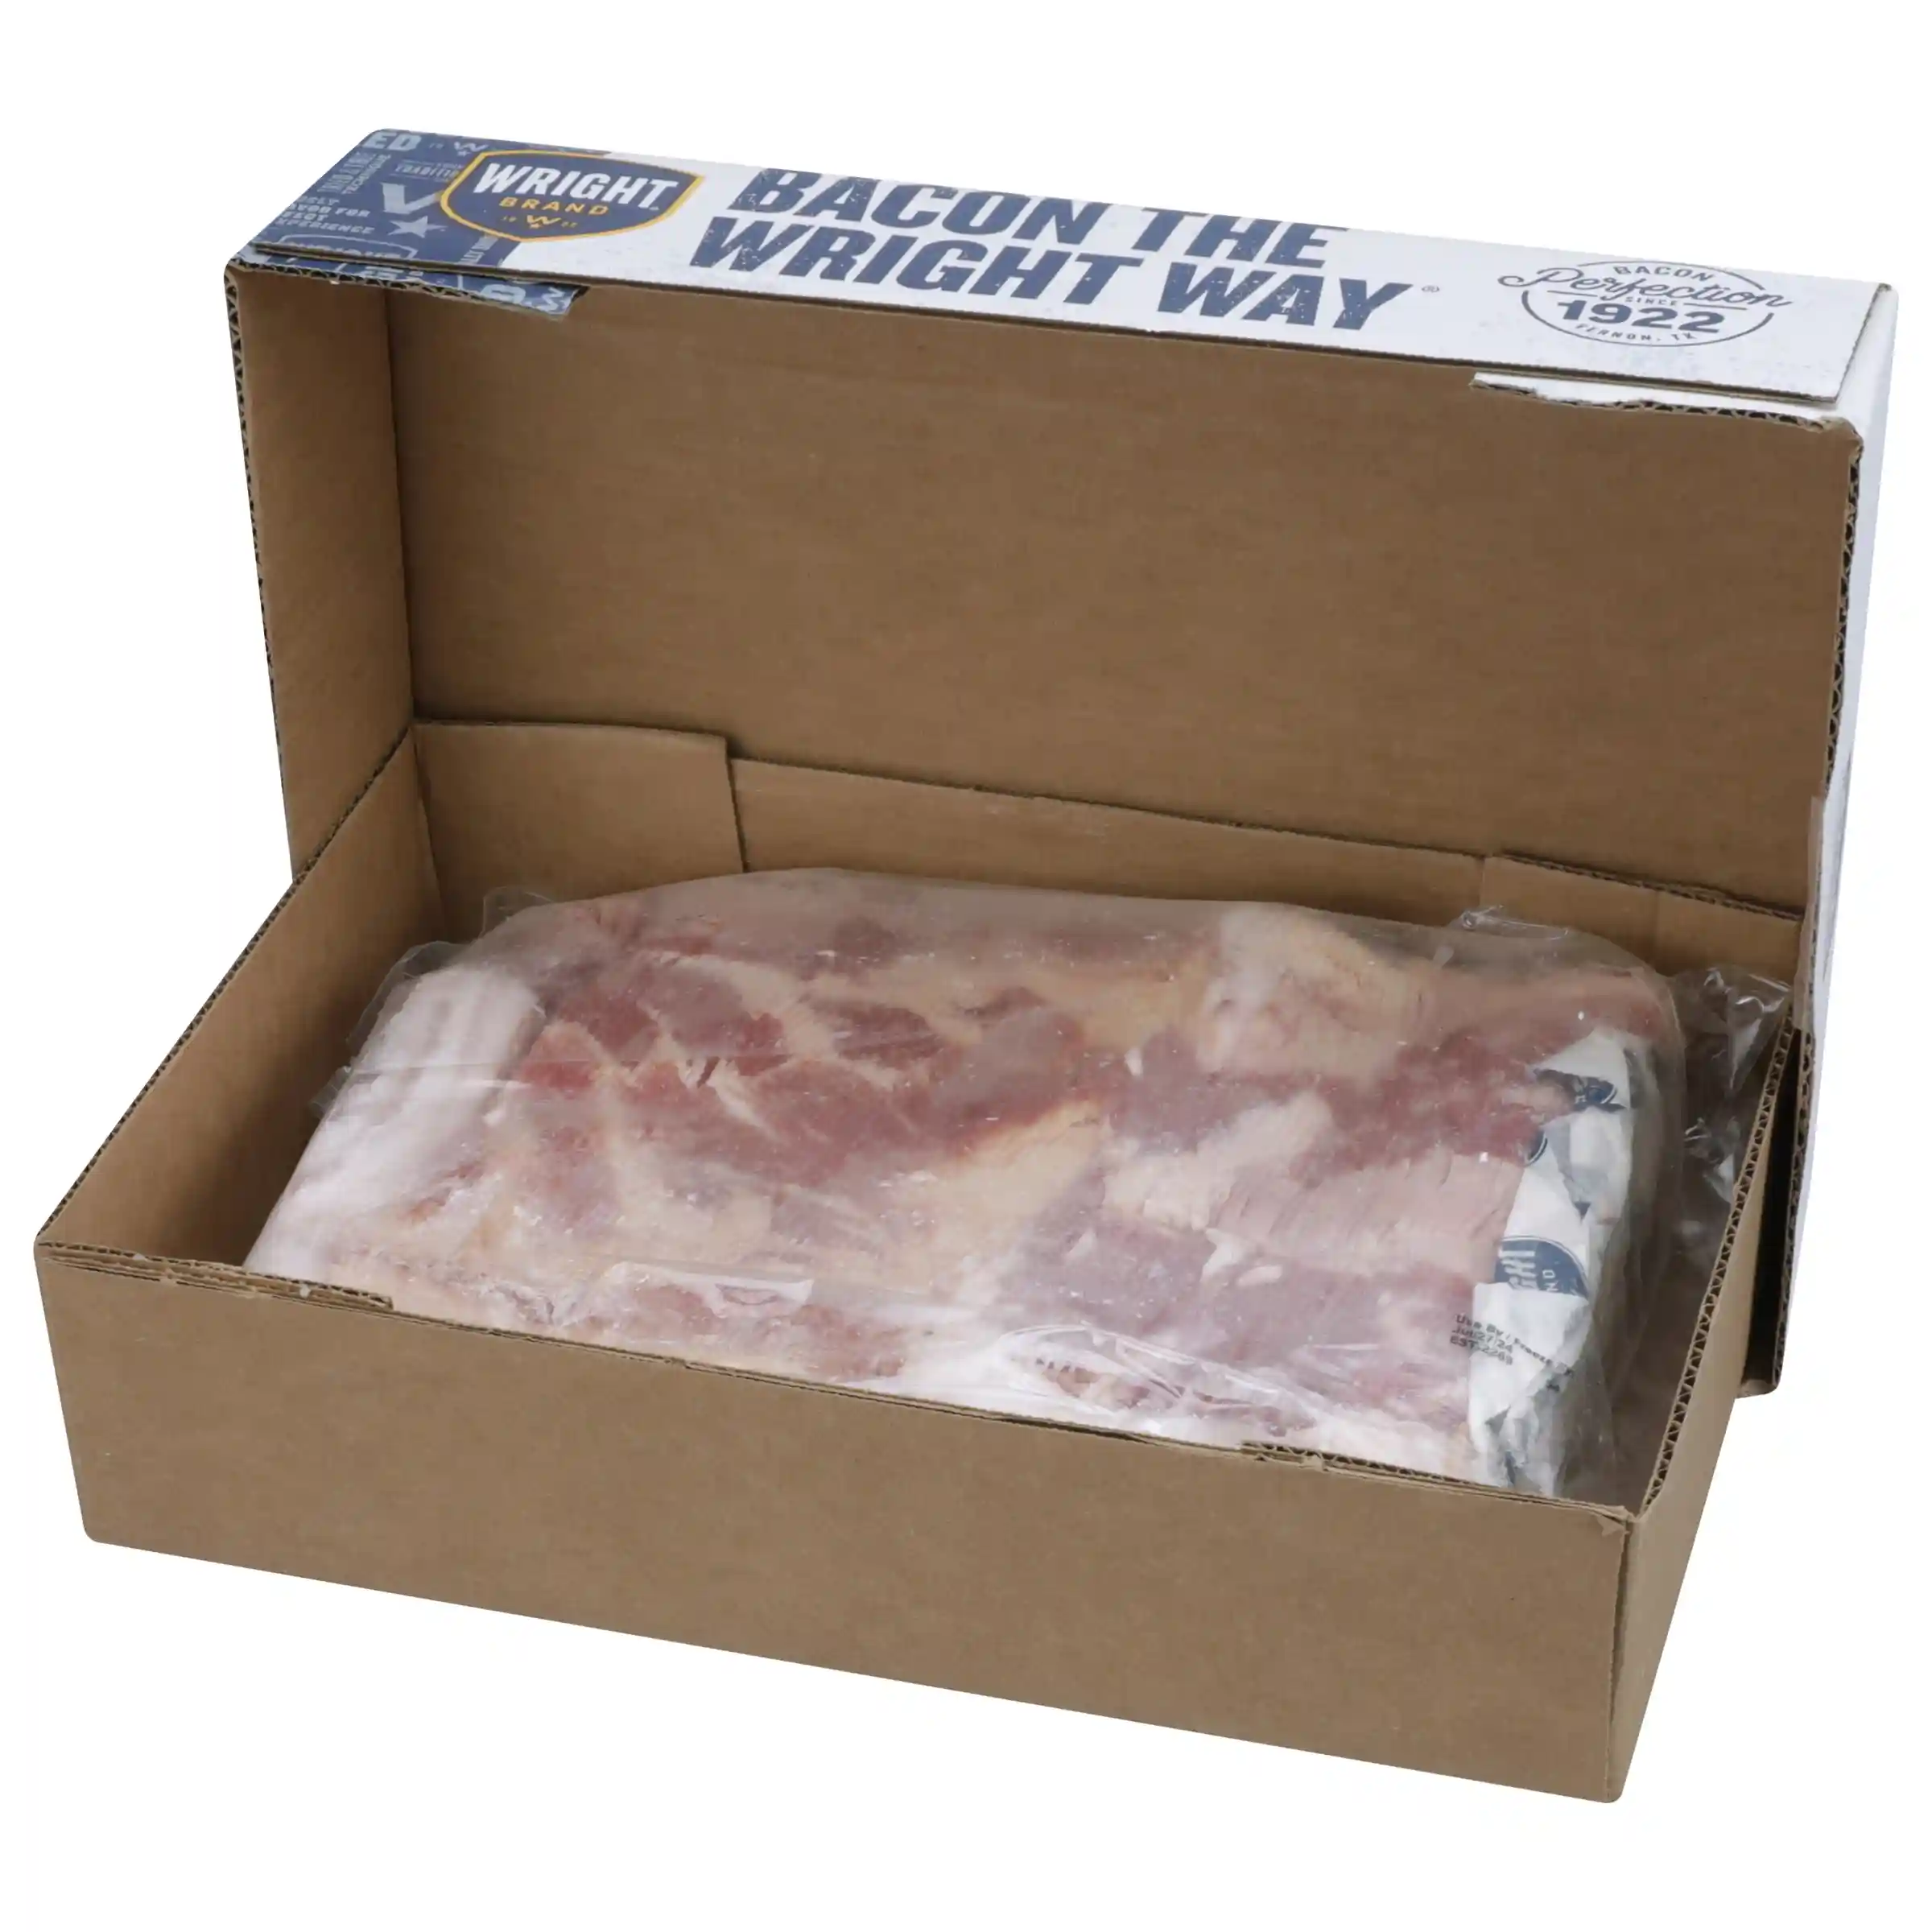 Wright® Brand Naturally Hickory Smoked Regular Sliced Bacon, Bulk, 15 Lbs, 14-18 Slices per Pound, Gas Flushed_image_31